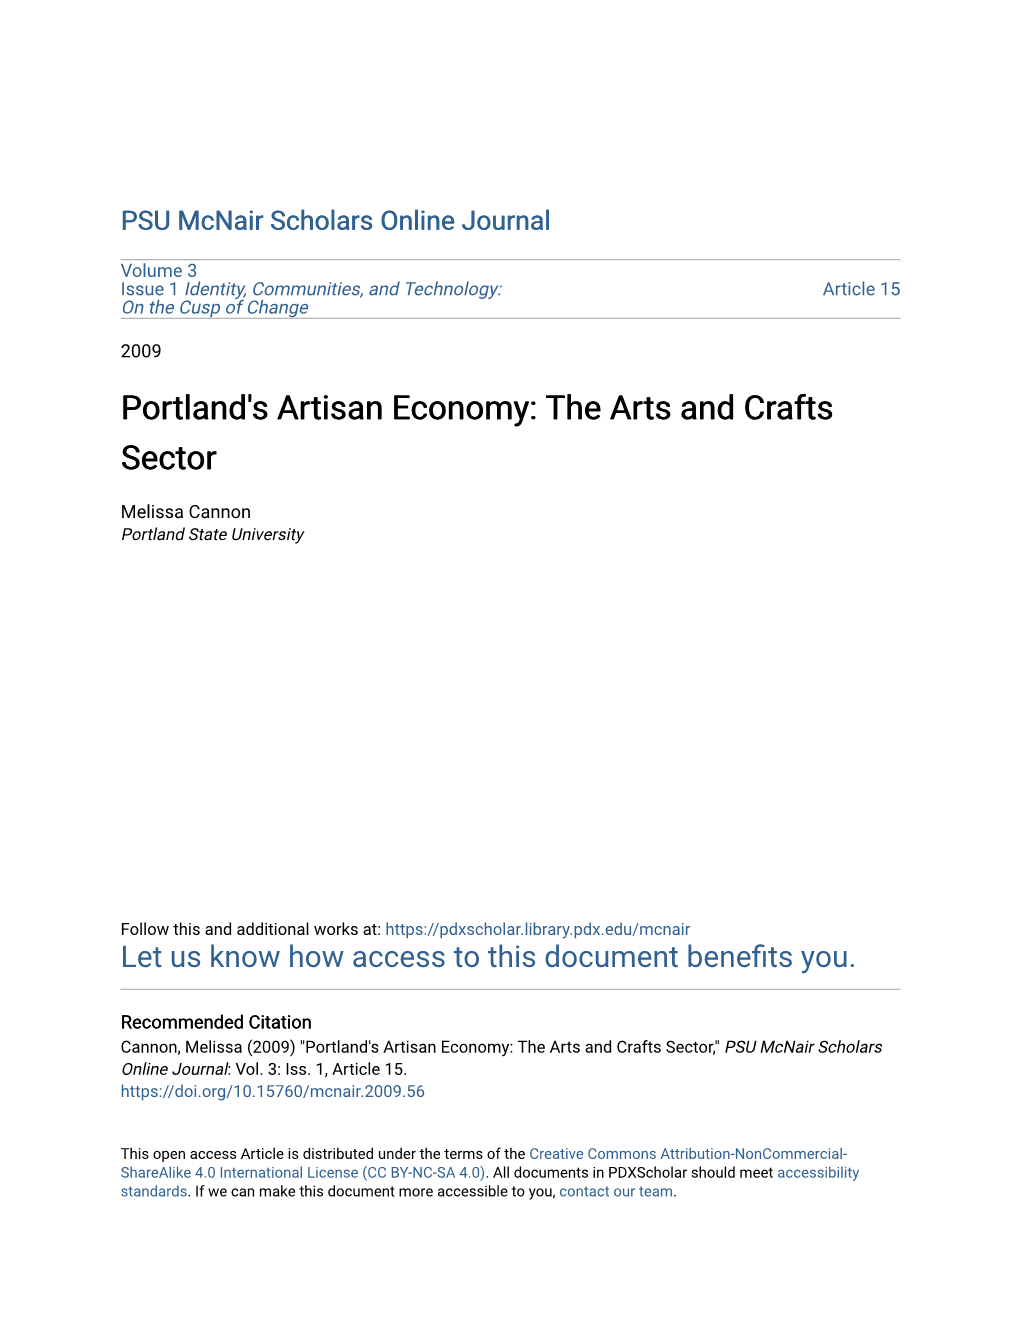 Portland's Artisan Economy: the Arts and Crafts Sector